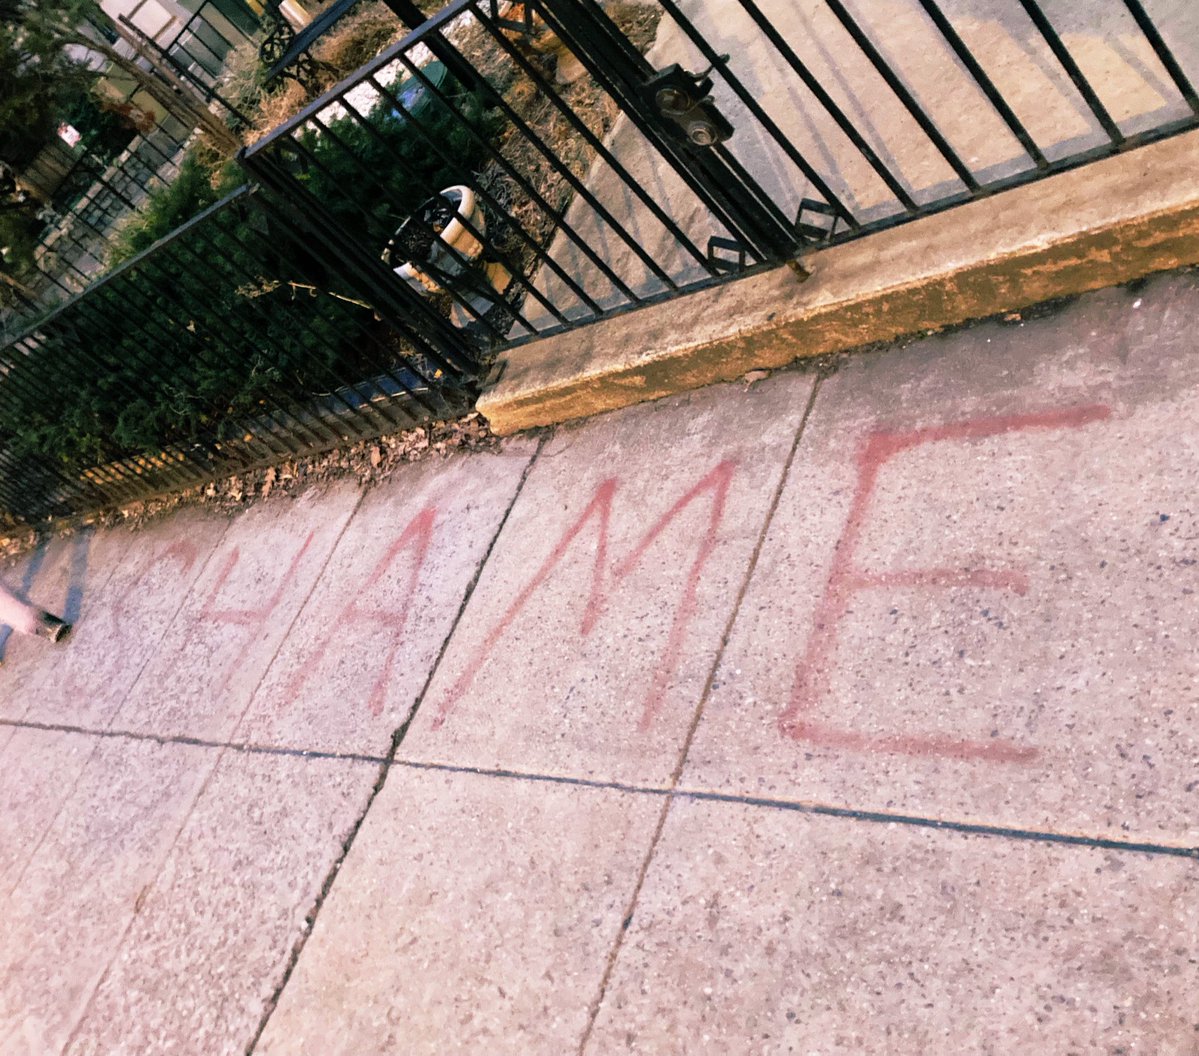 SHAME is scrawled in spray paint on the sidewalk in front of the Belarusian embassy in D.C